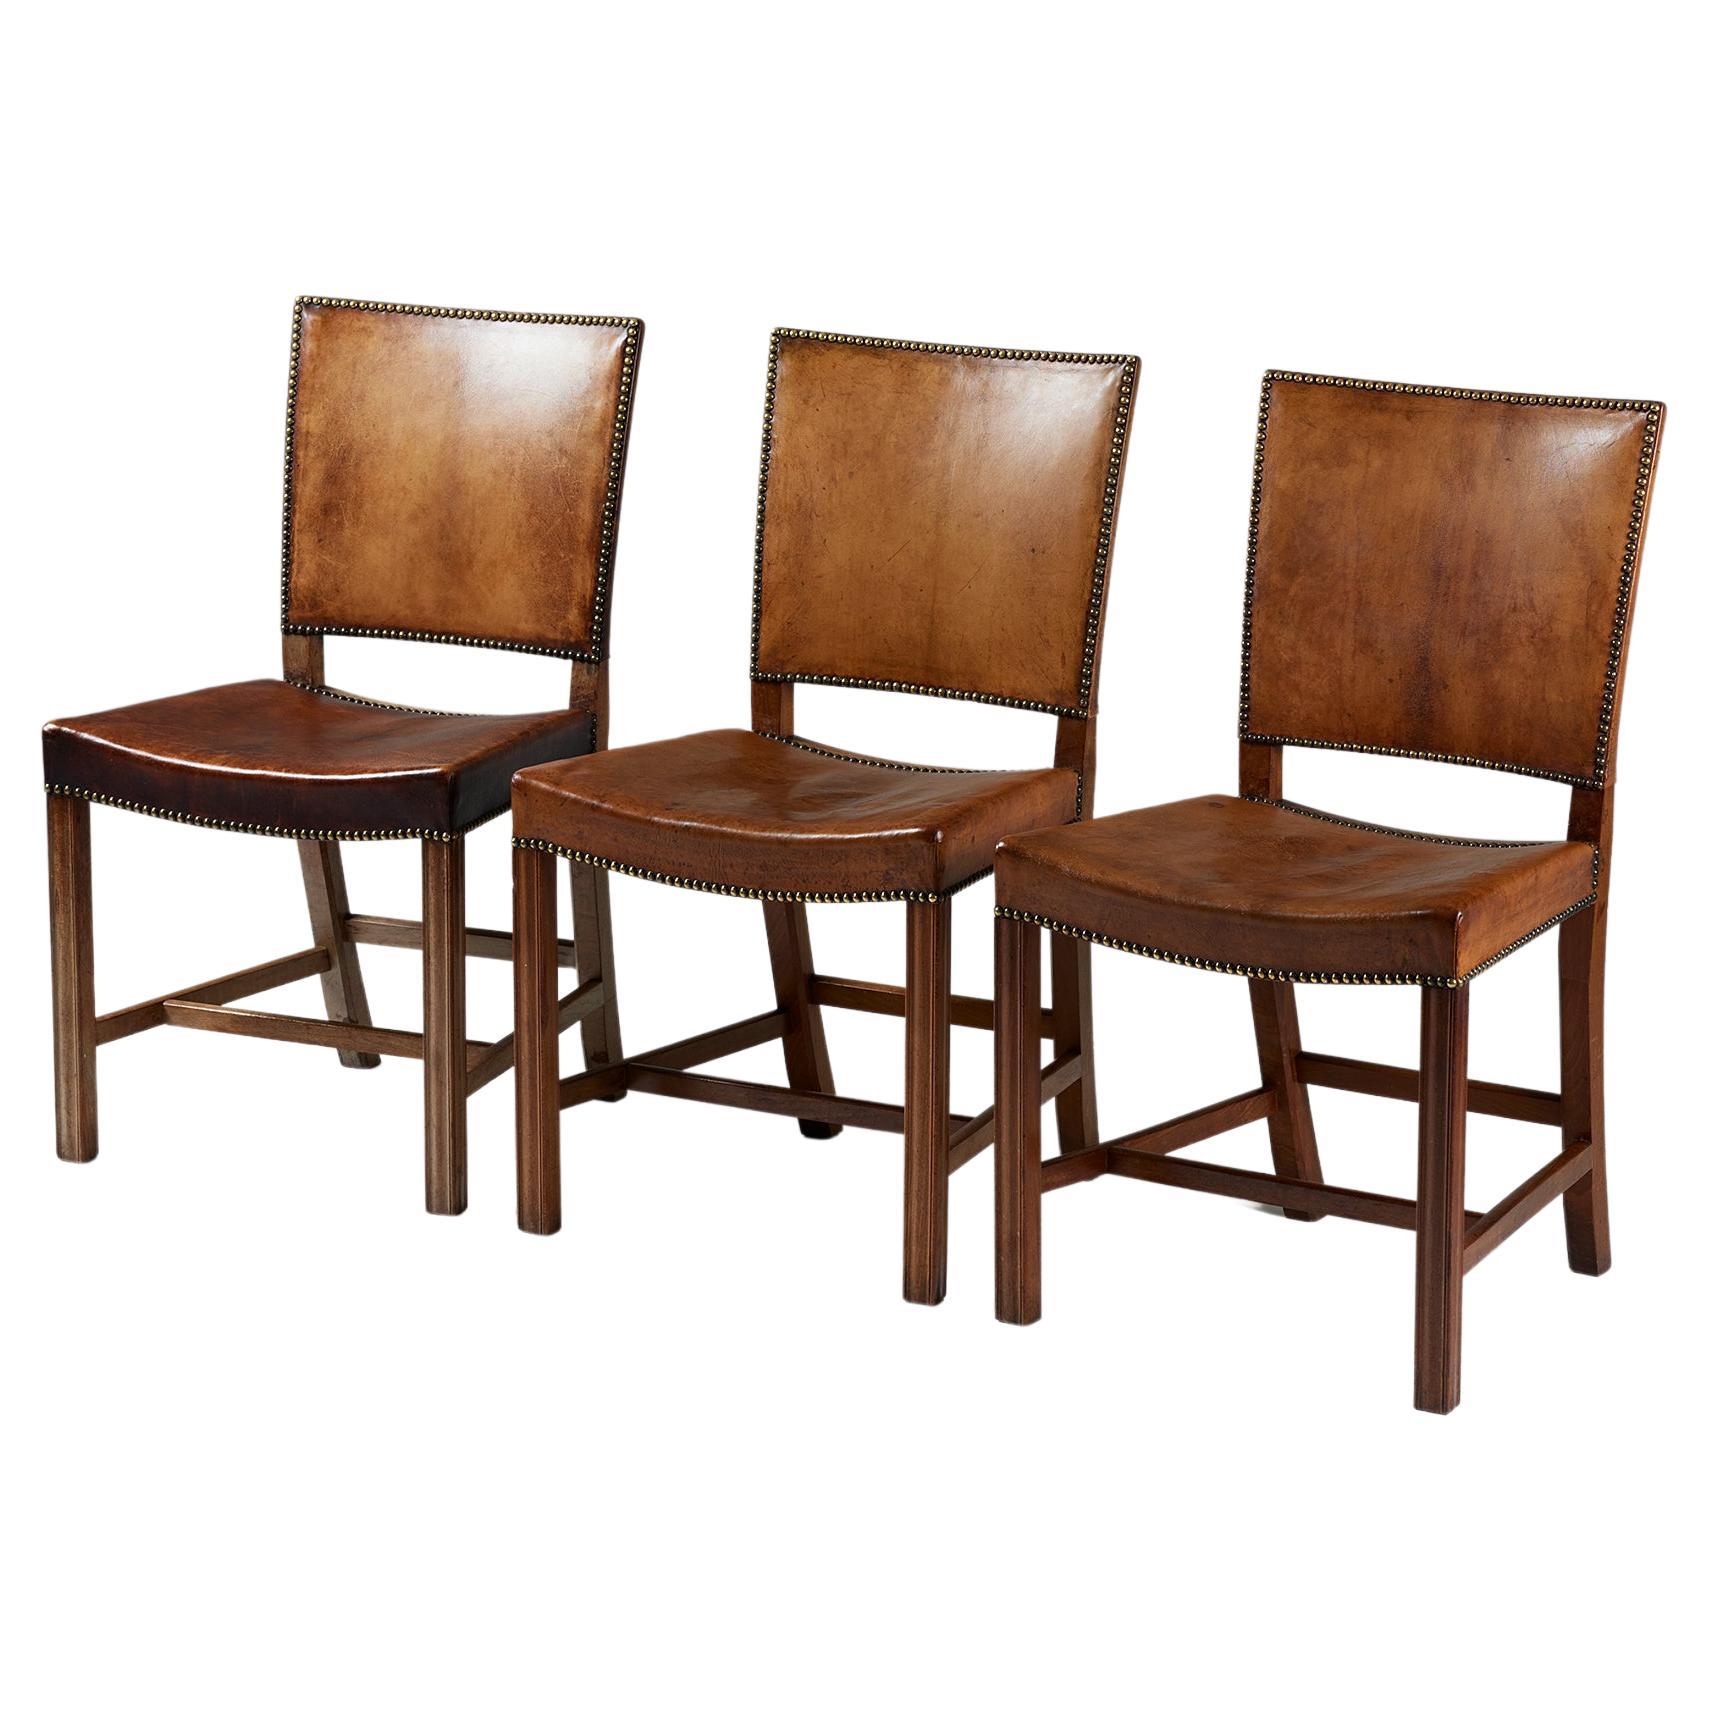 Set of three chairs ‘The Red Chairs’ model 3949 designed by Kaare Klint, Denmark For Sale